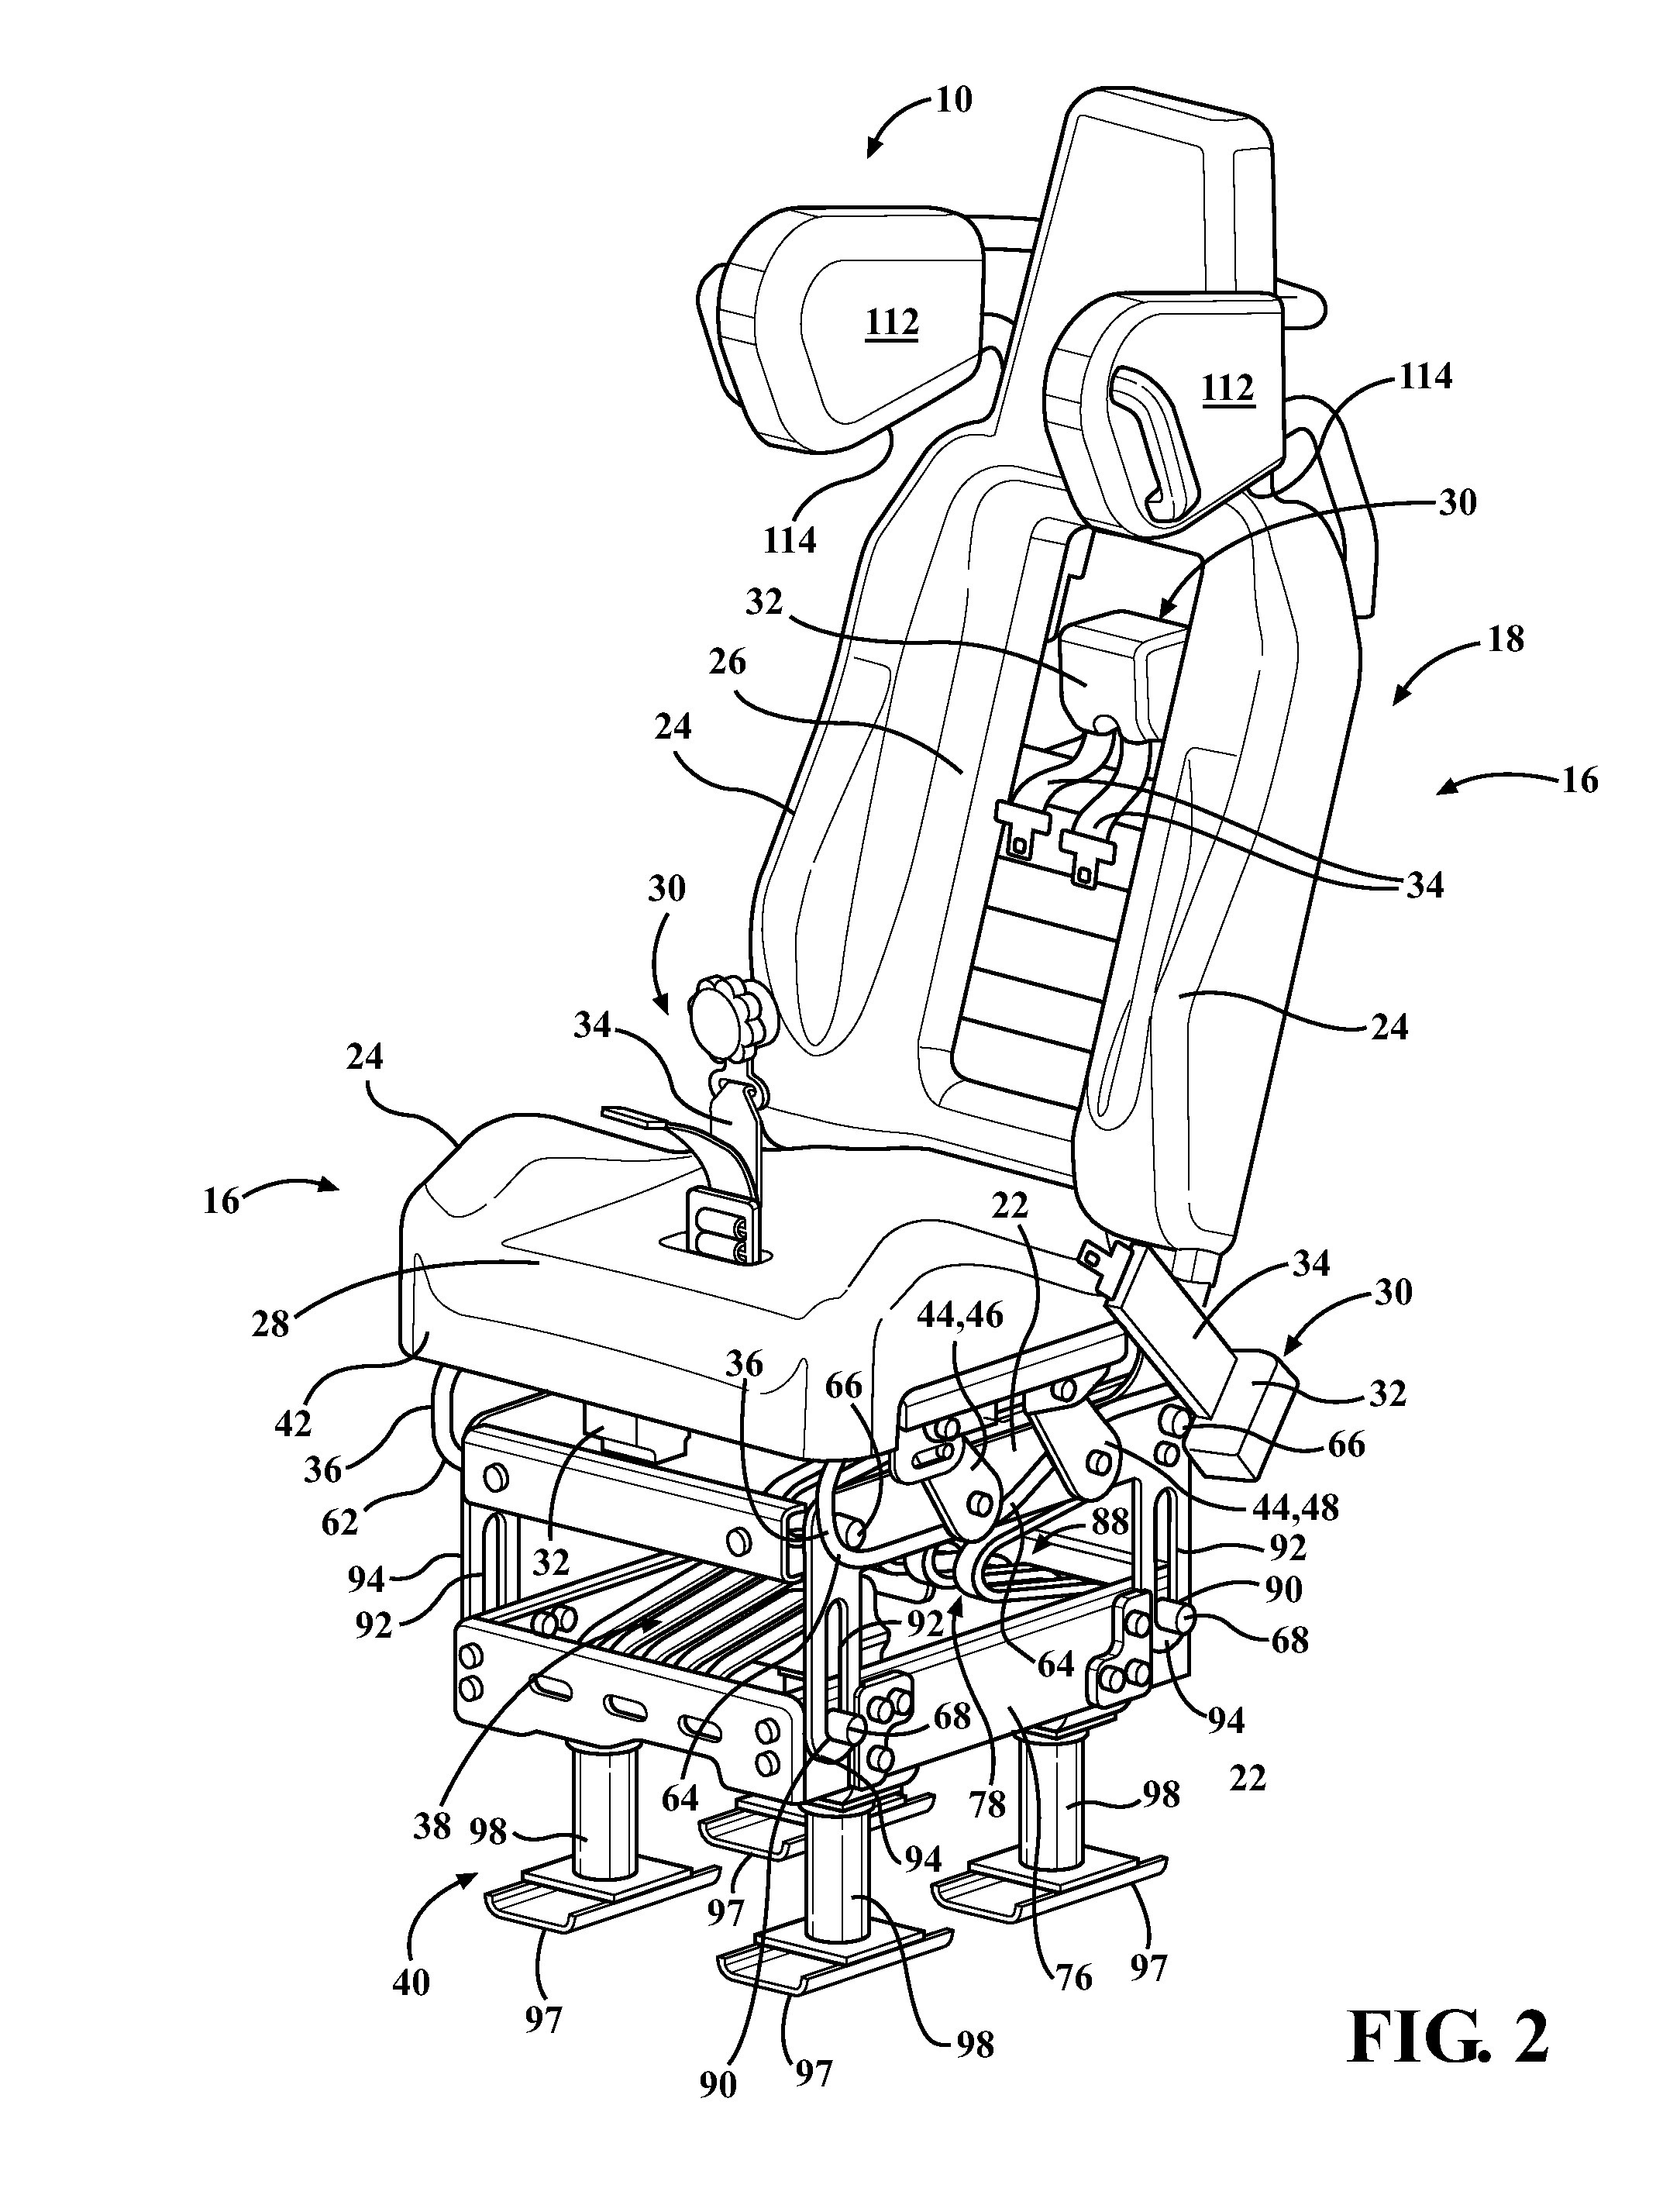 Energy absorbing device for a seat of a vehicle